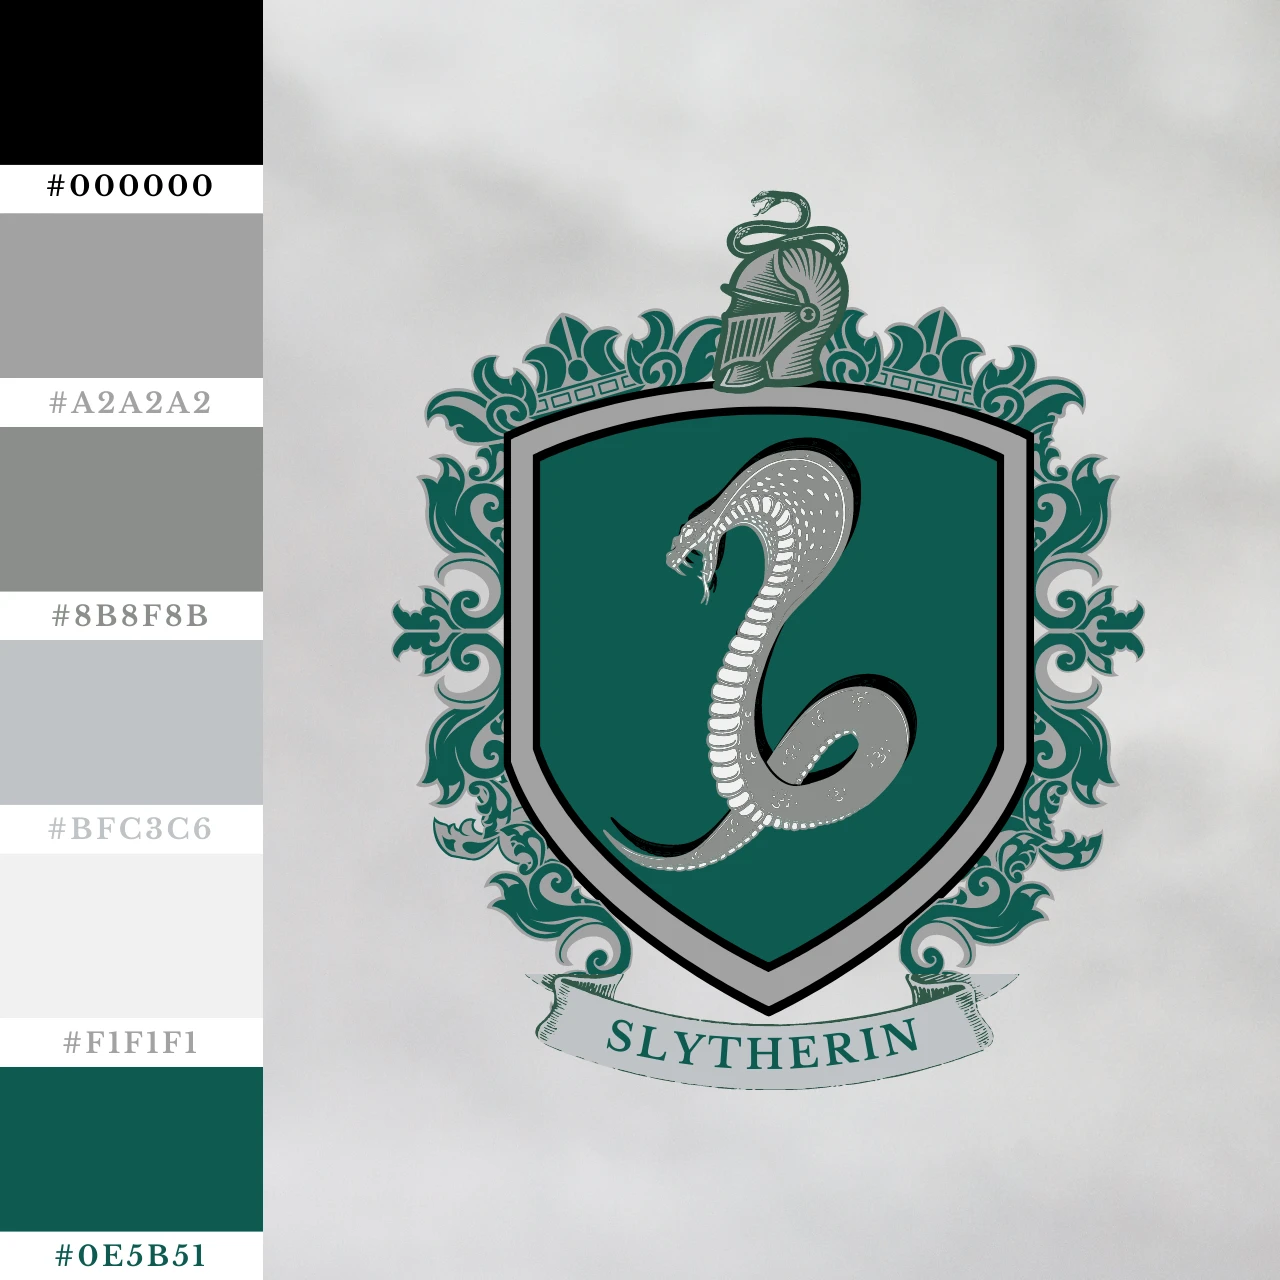 Slytherin House Colors